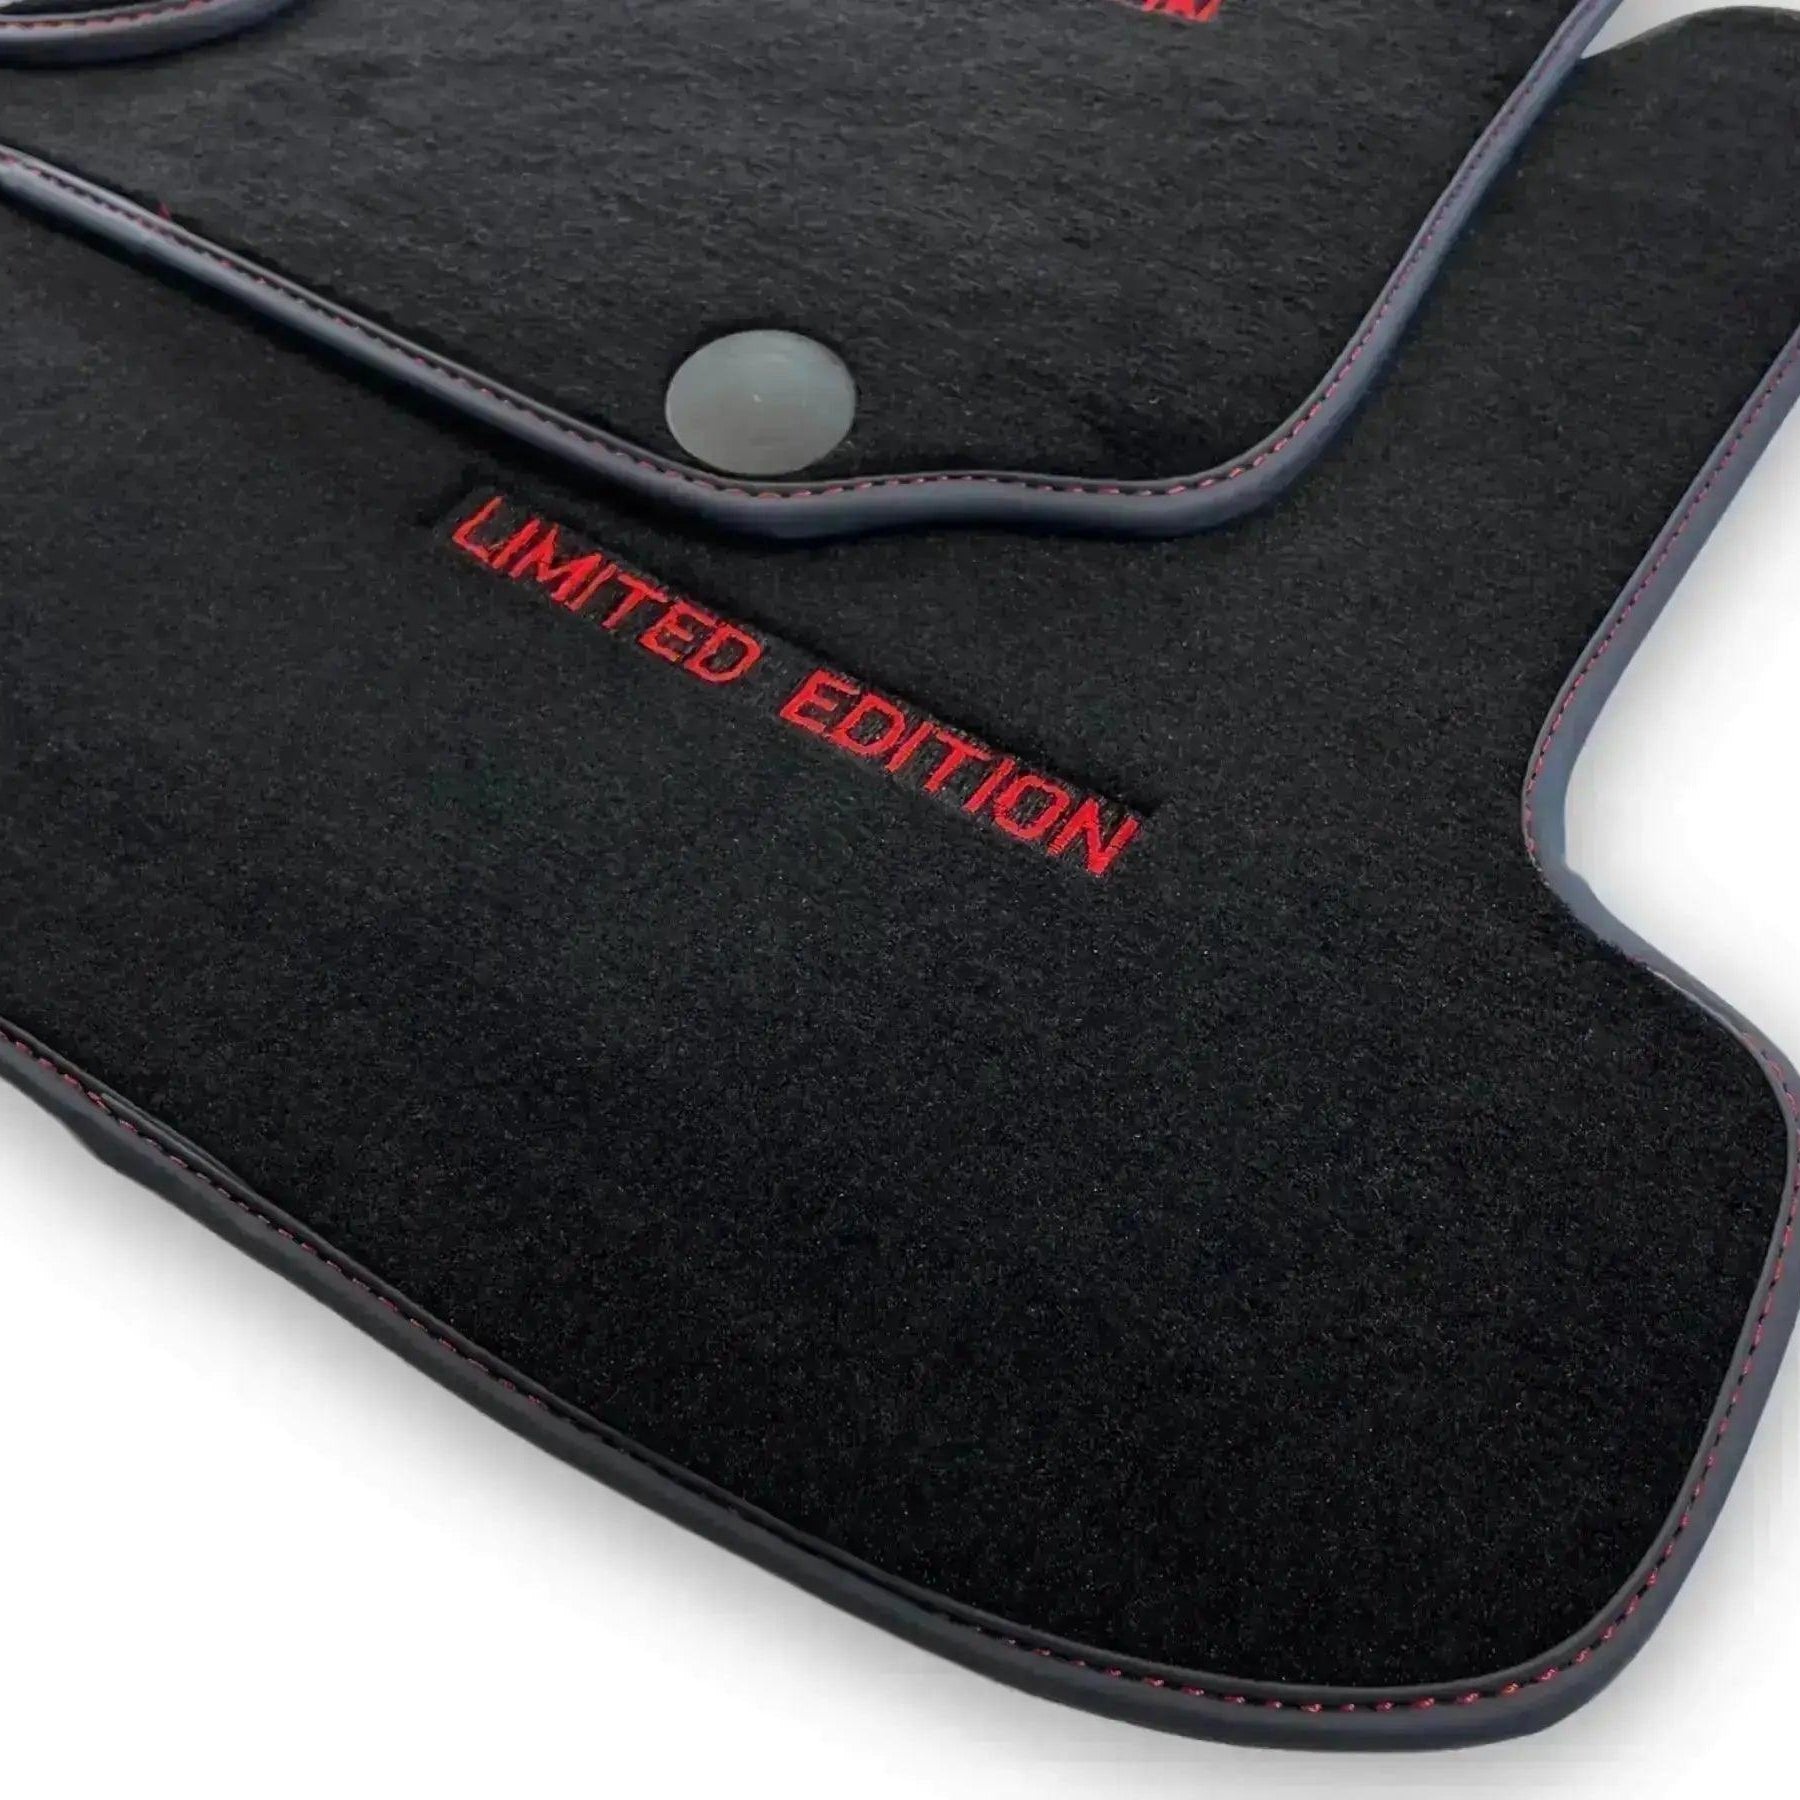 Black Floor Mats For Mercedes Benz GLE-Class W166 Allrounder (2015-2019) | Fighter Jet Edition